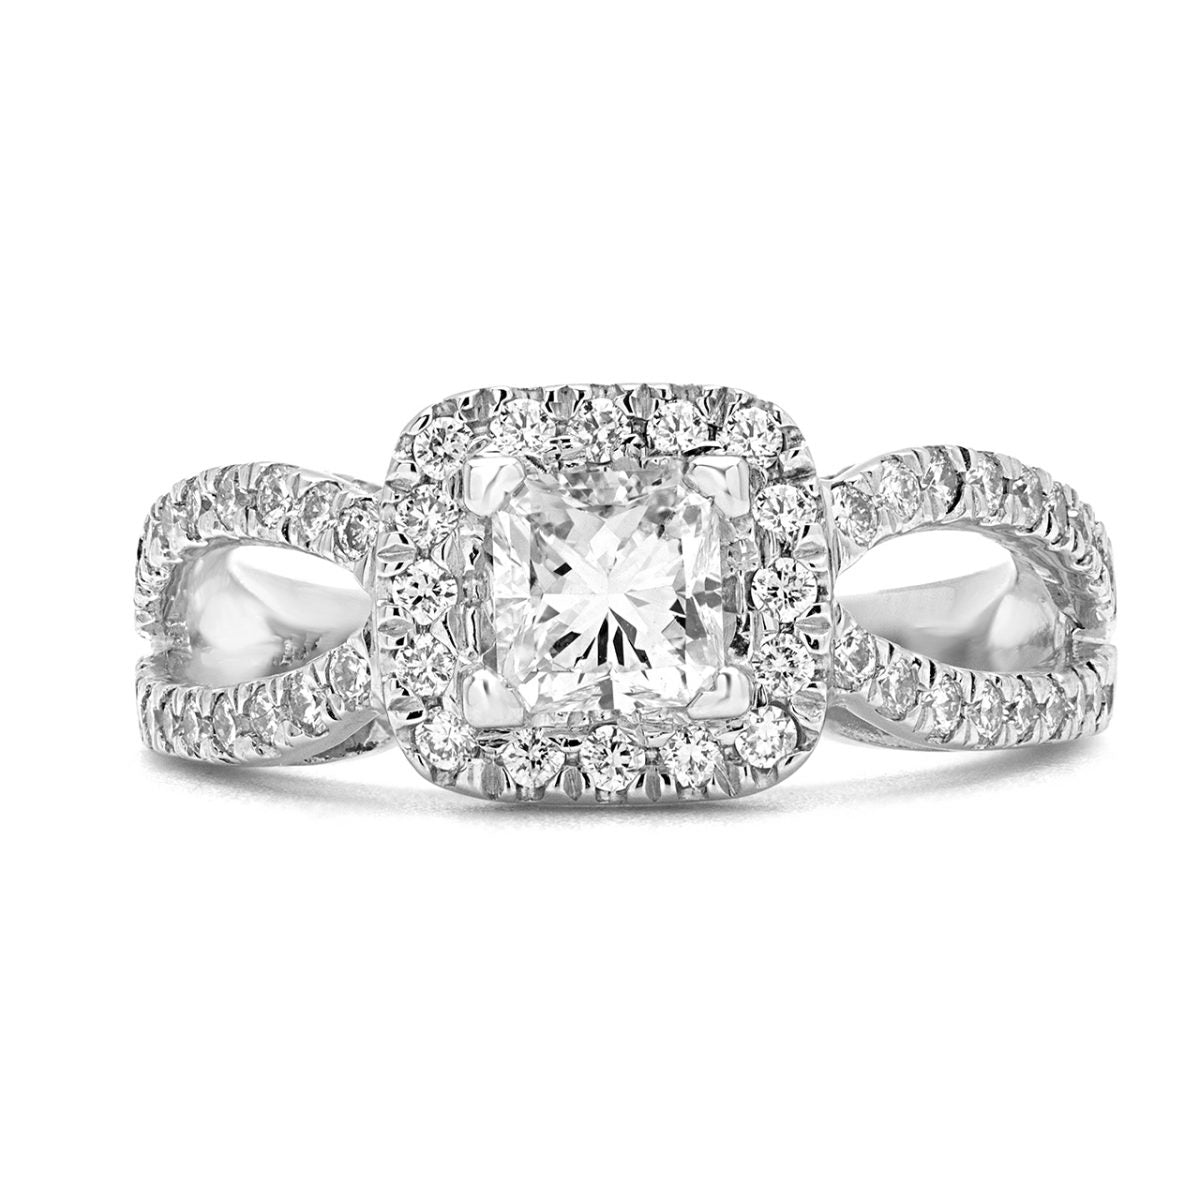 Icy halo lab-grown engagement ring 1.03 (ctw) in 14k white gold